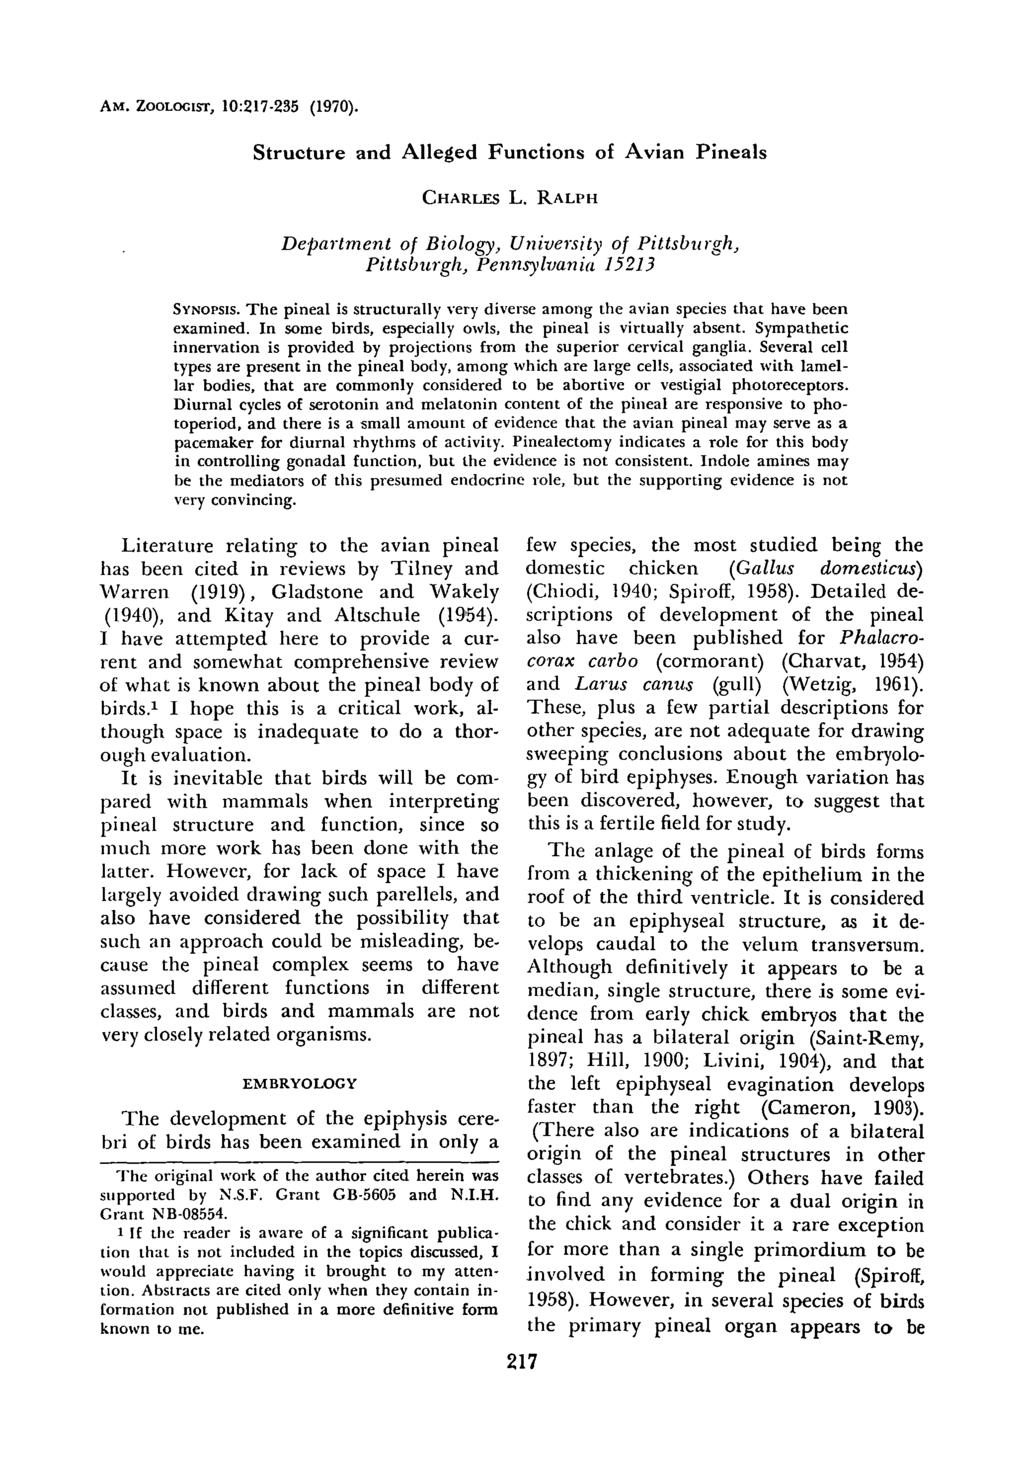 AM. ZOOLOCIST, 10:217-235 (1970). Structure and Alleged Functions of Avian Pineals CHARLES L. RALPH Department of Biology, University of Pittsburgh,, Pittsburgh, Pennsylvania 15213 SYNOPSIS.